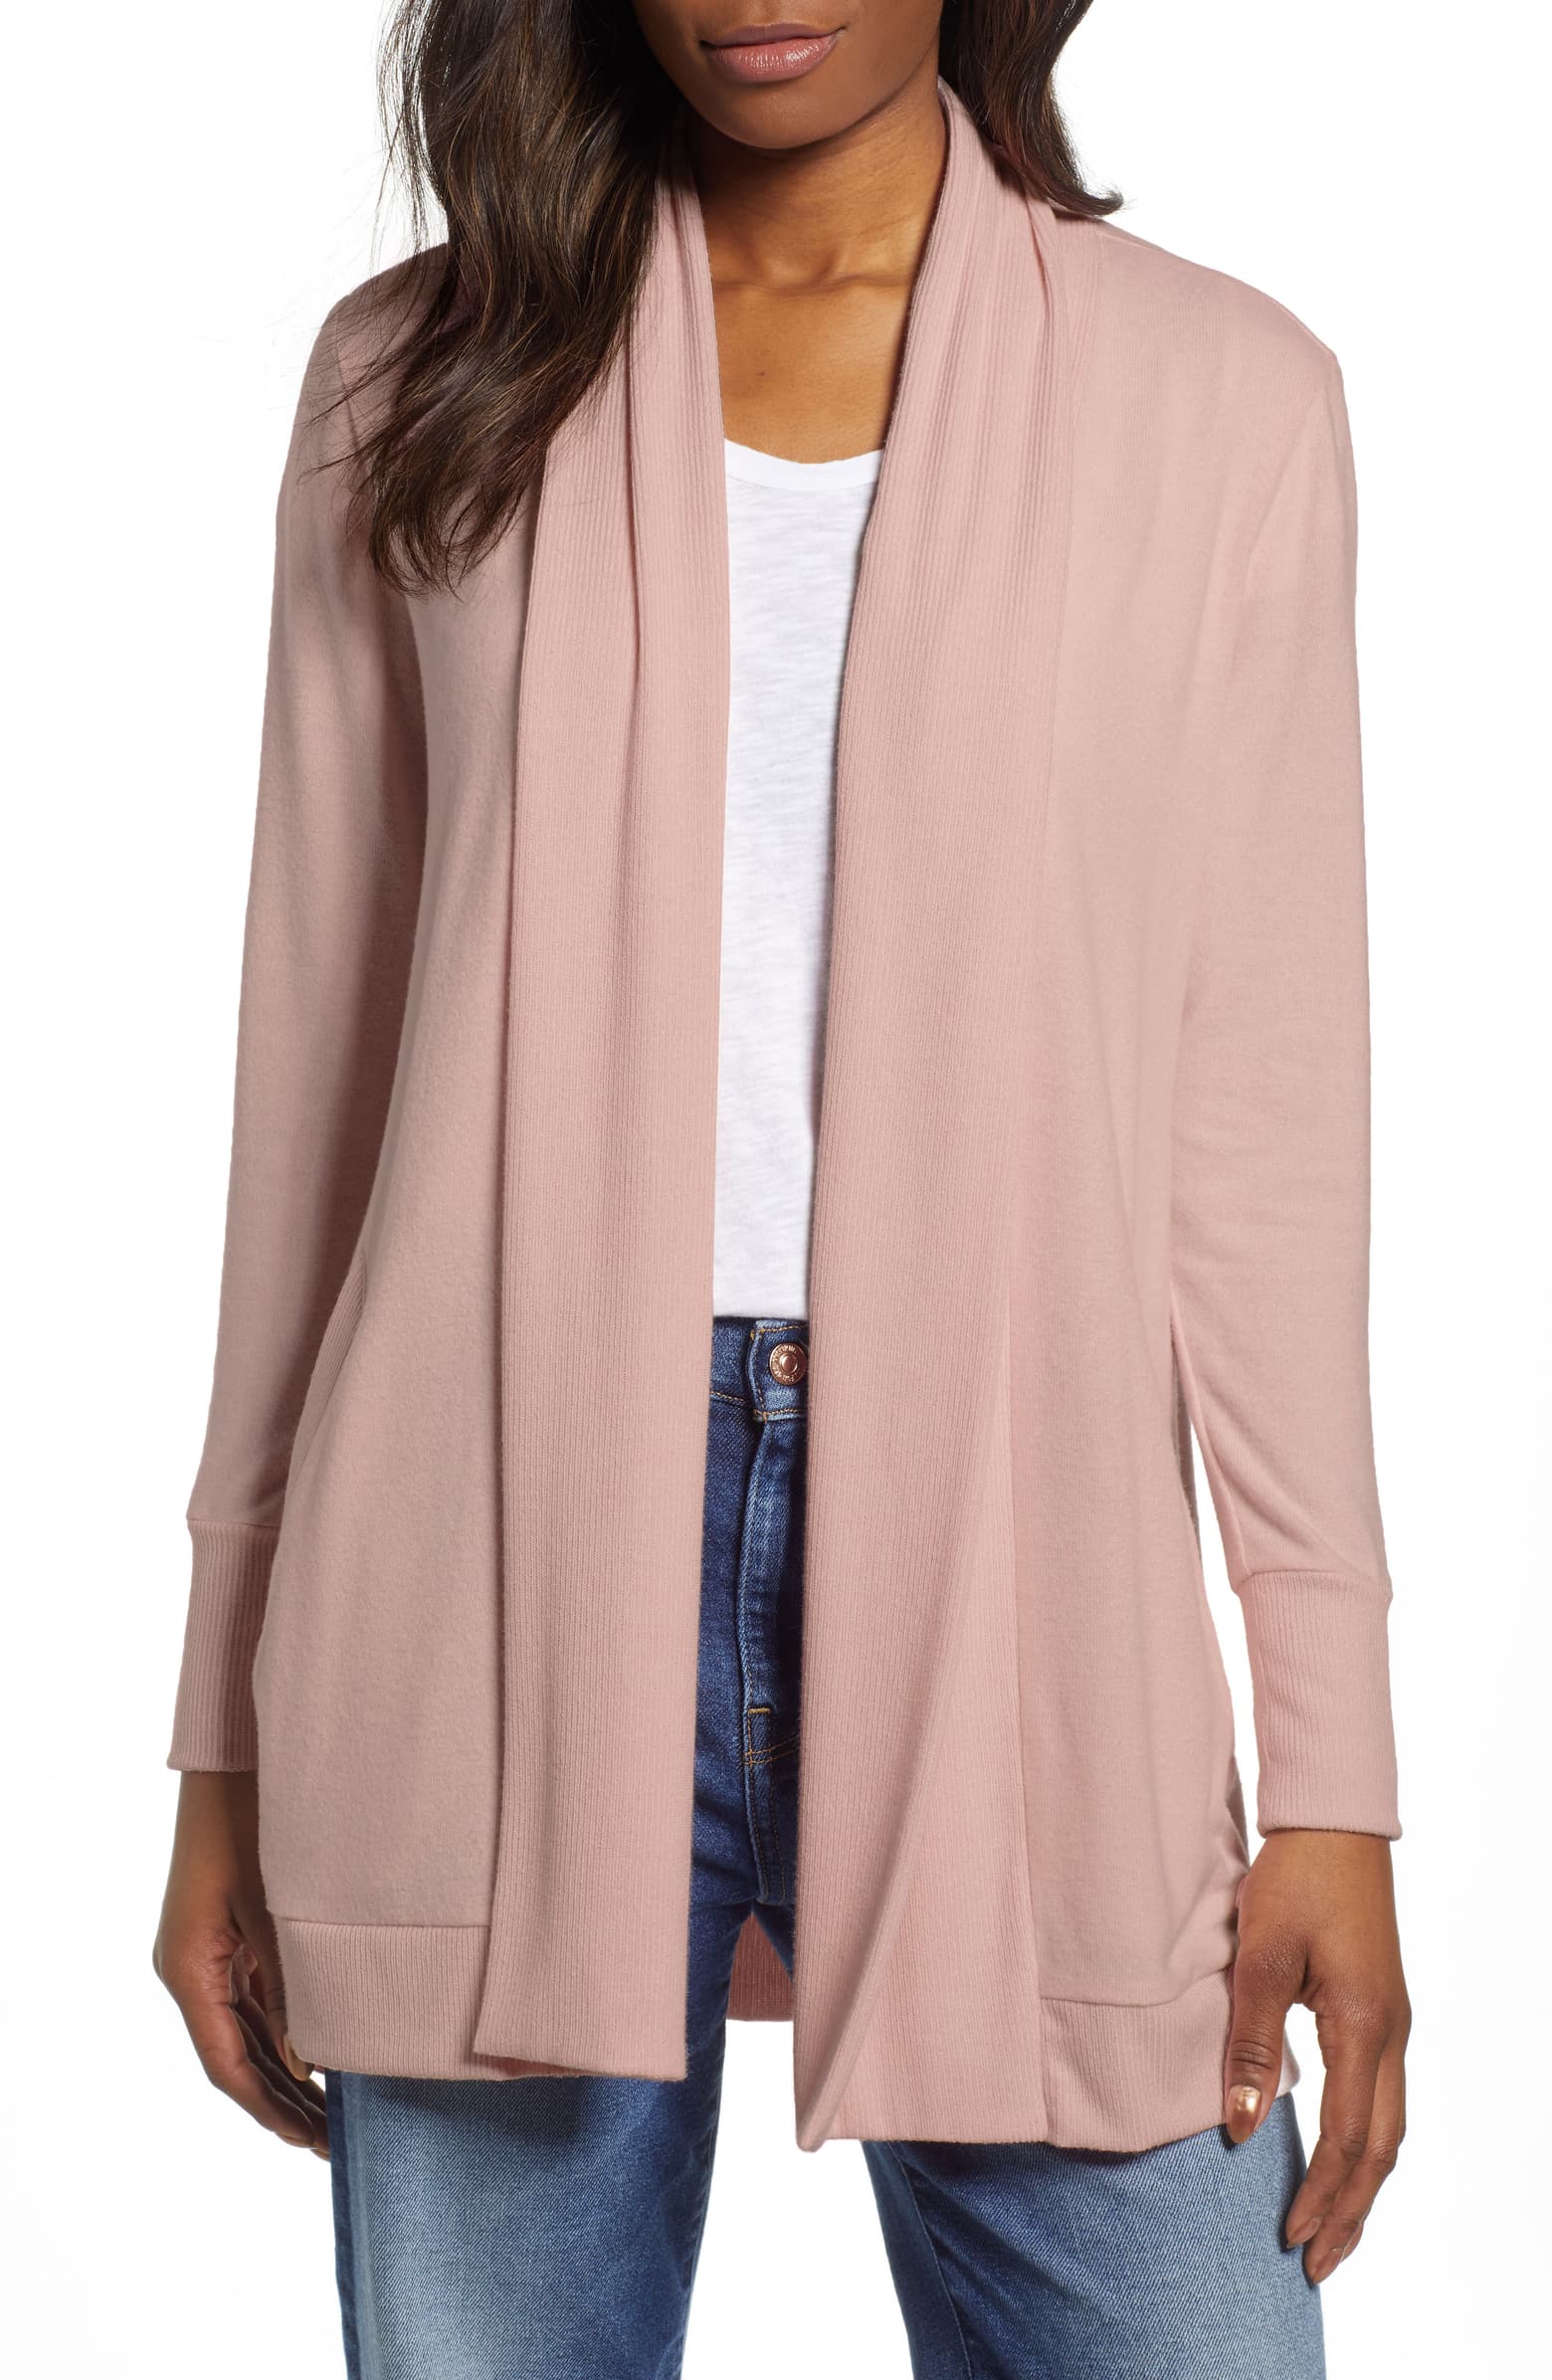 This Seriously Cozy Cardigan Is On Sale For Cheap And Selling Fast ...